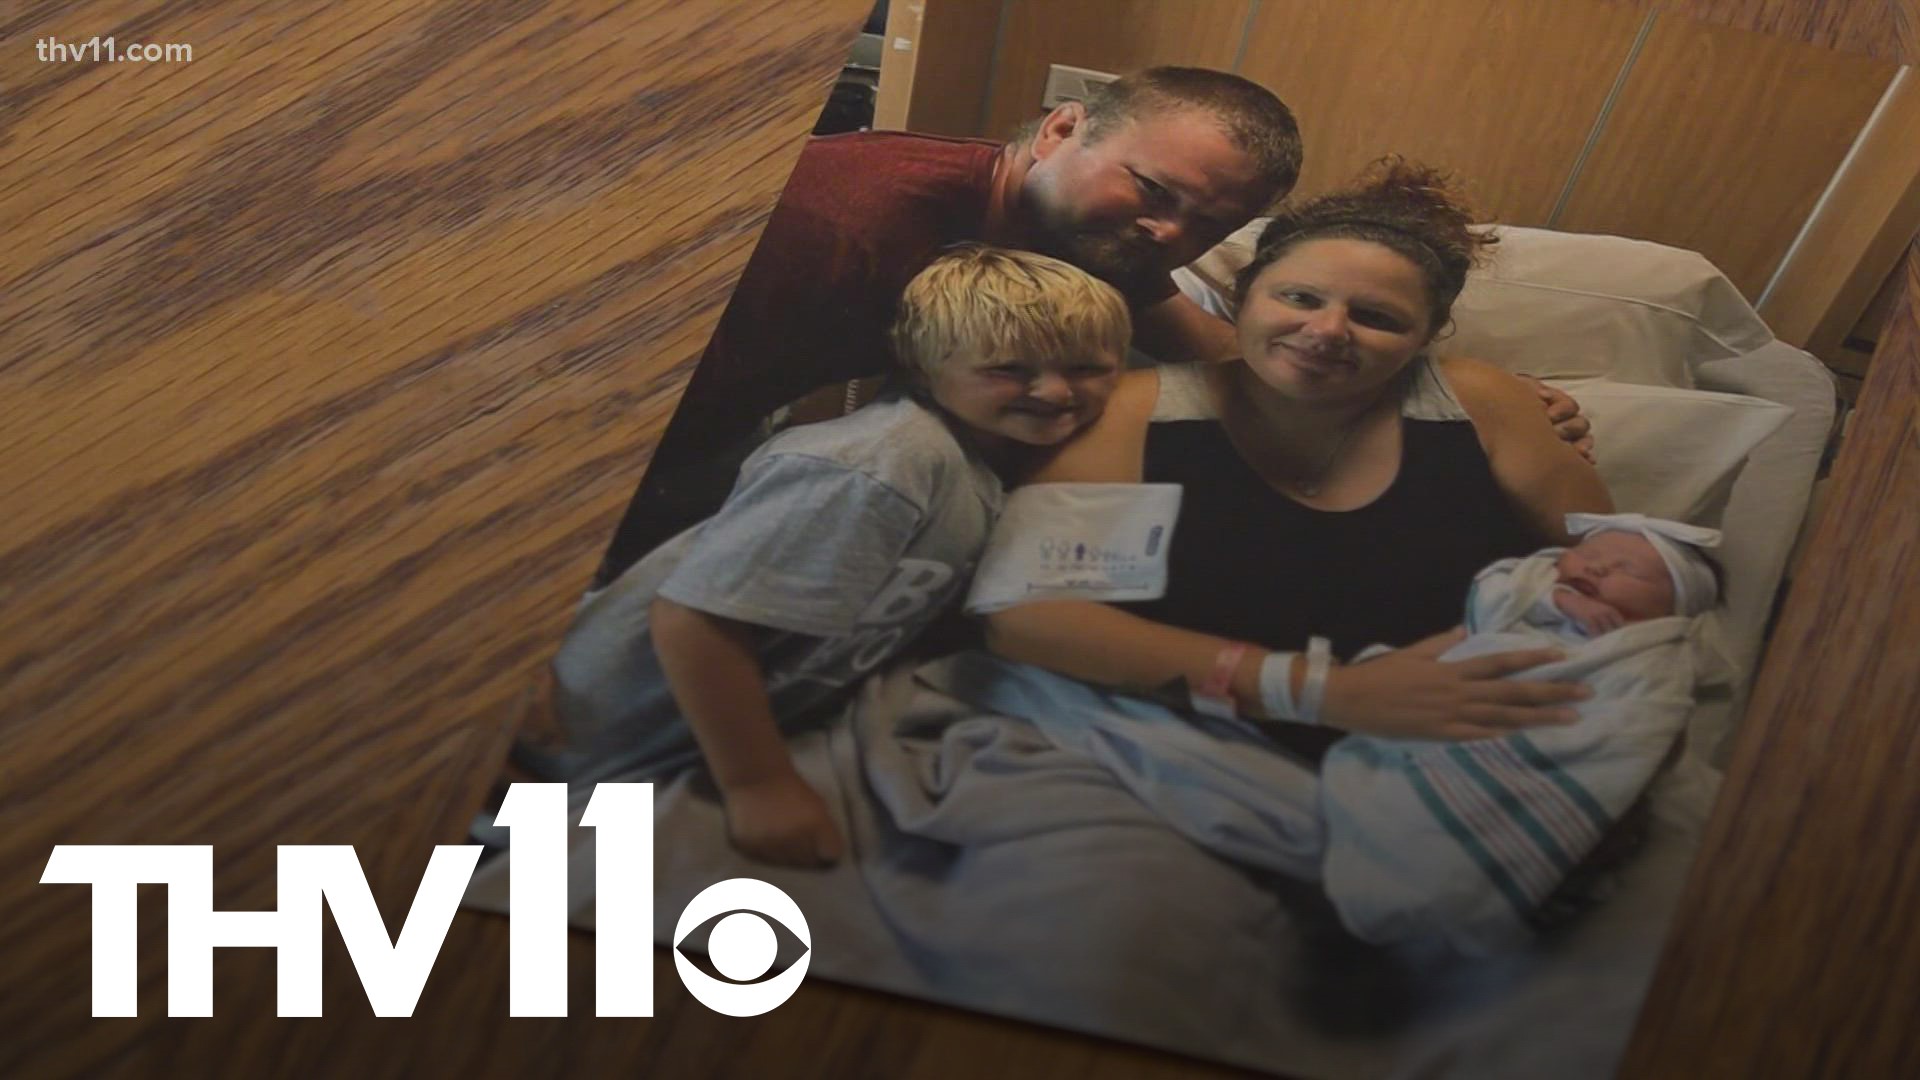 Katie Moran gave birth to her second child, before being hospitalized with COVID-19. She died Wednesday, and now her family is remembering her as she was.